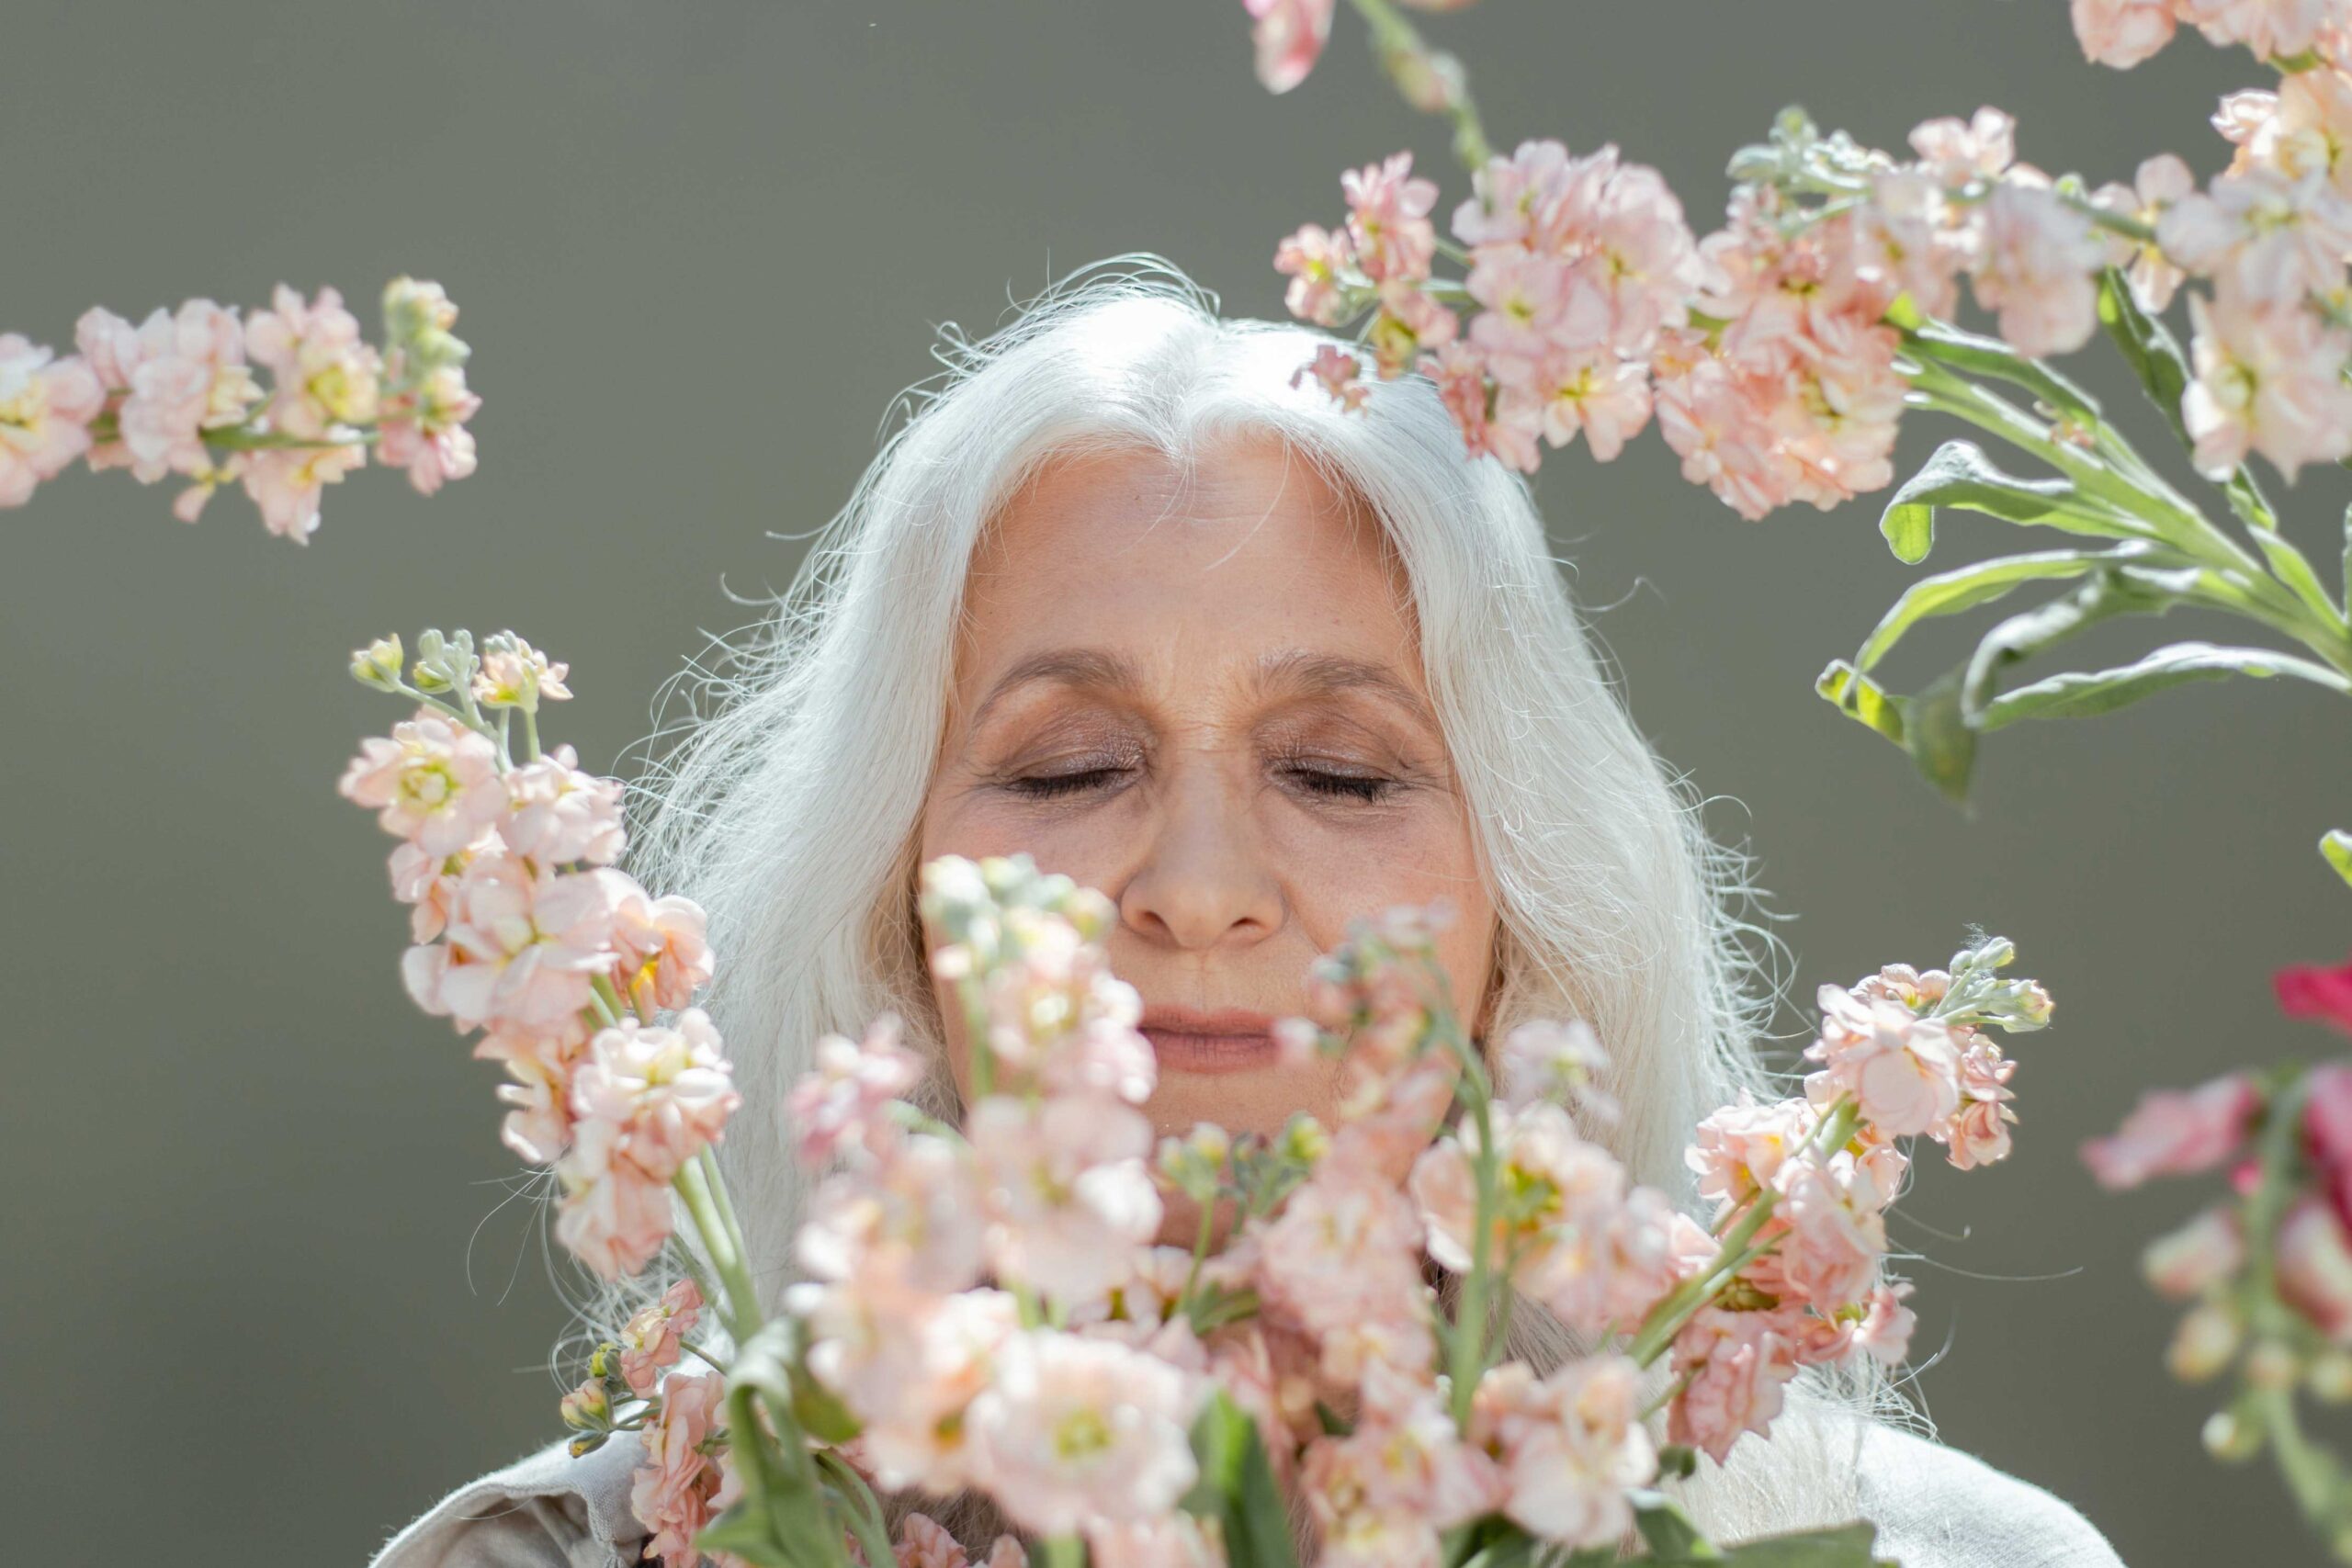 Woman With White Hair Surrounded by White and Pink Flowers